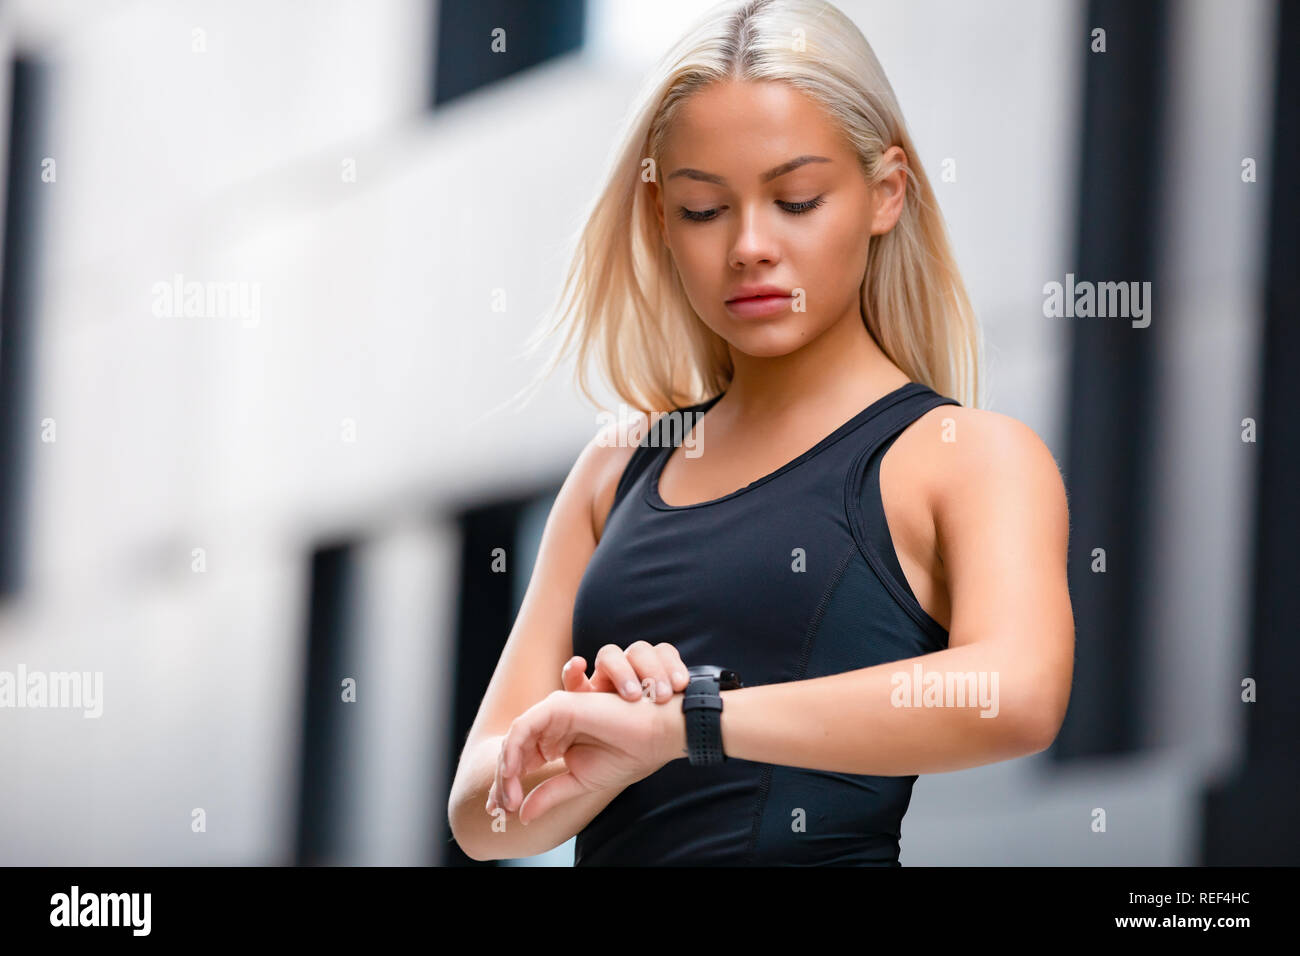 Woman Checking Heart Rate Using Smart watch After Workout Stock Photo